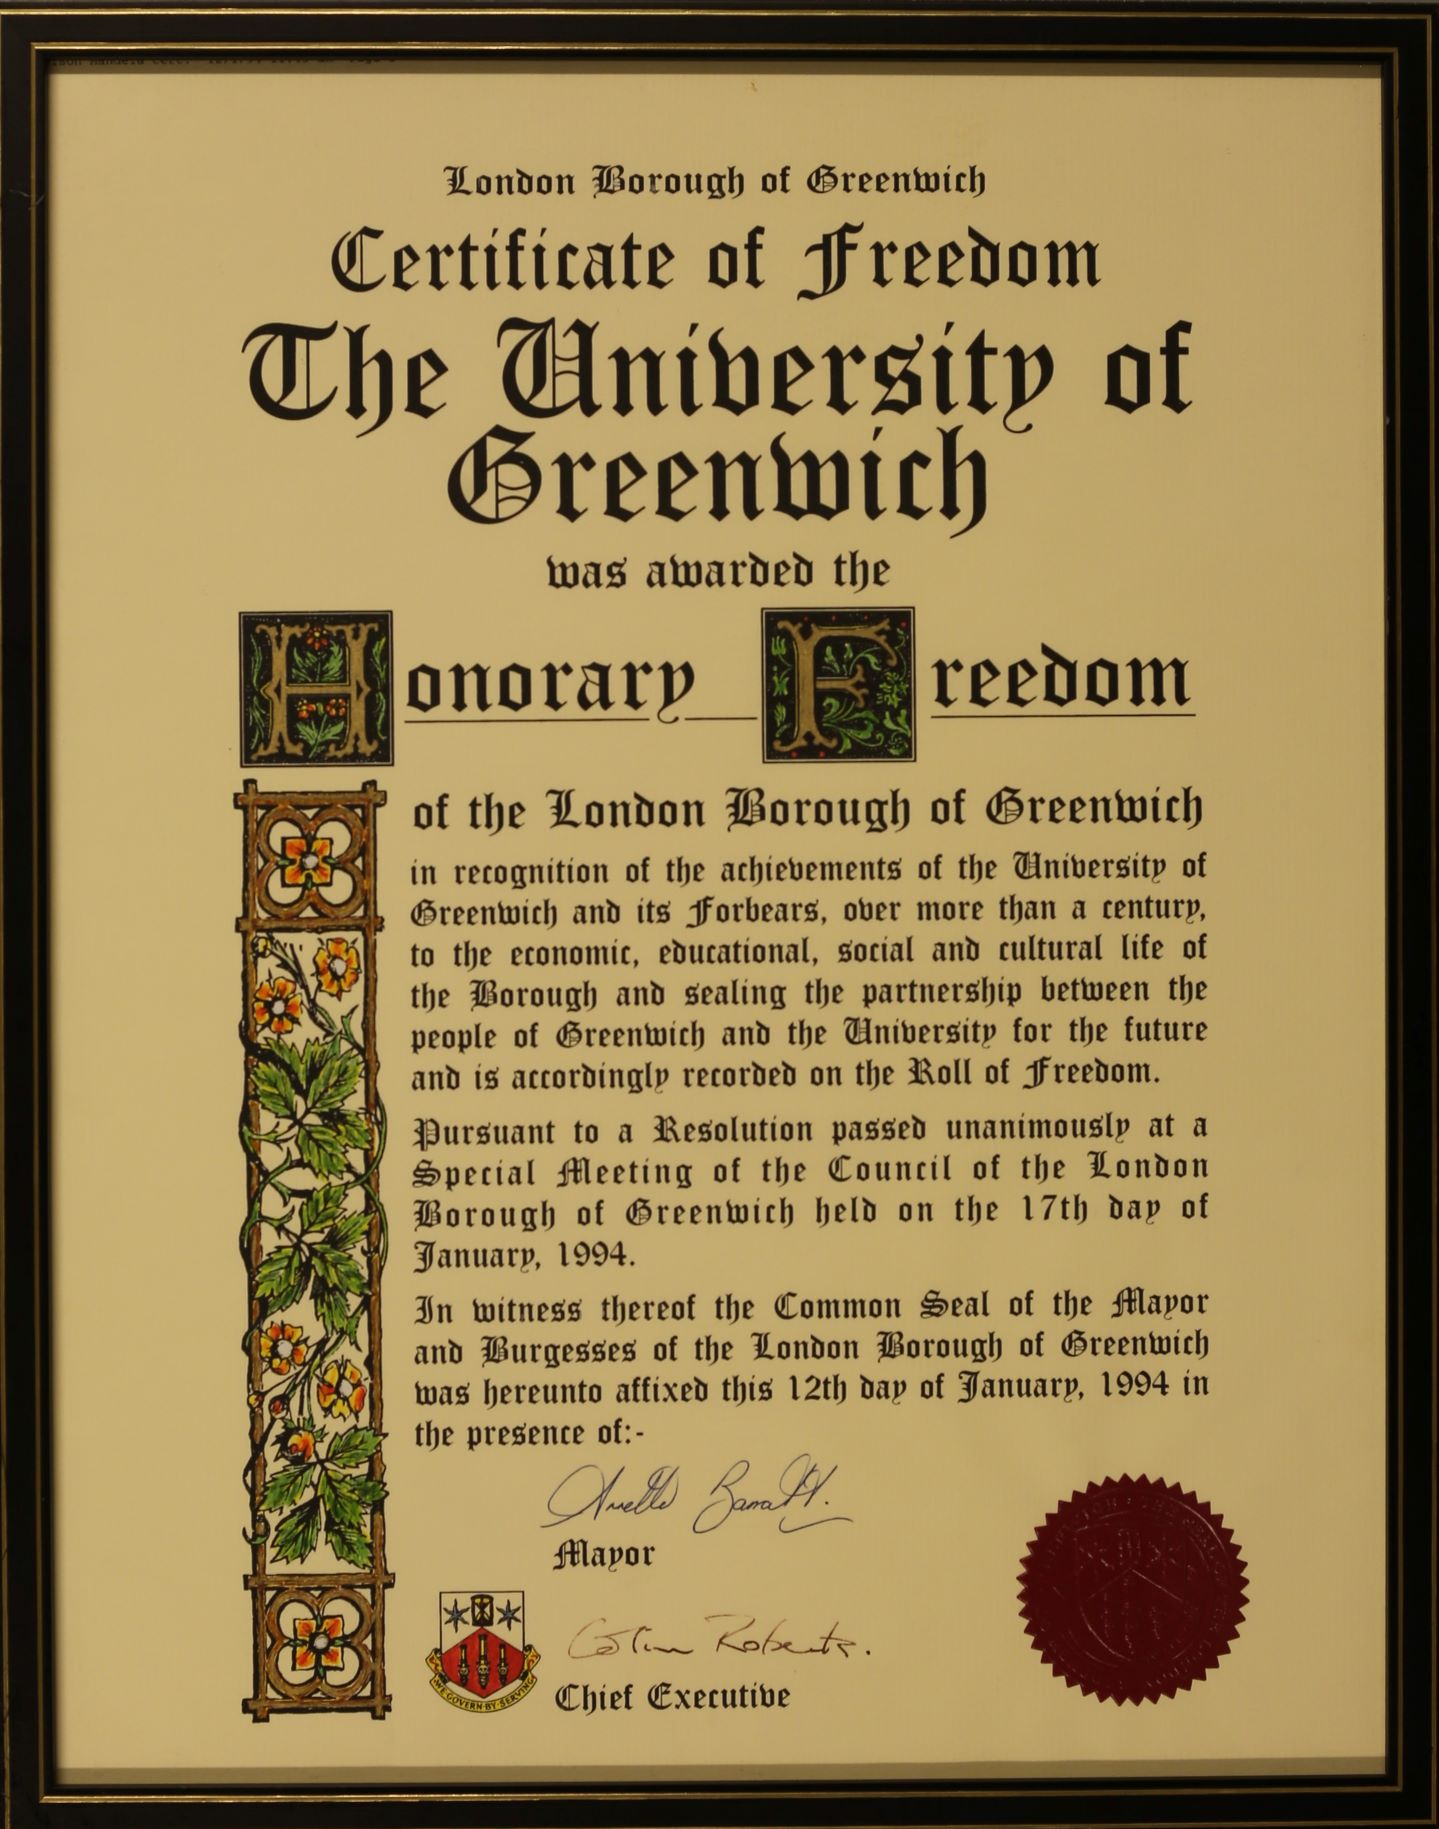 London Borough of Greenwich. Certificate of Freedom. The University of Greenwich was awarded the Honorary Freedom of the London Borough of Greenwich in recognition of the achievements of the University of Greenwich and its forbears, over more than a century, to the economic, educational, social and cultural life of the Borough and sealing the partnership between the people of Greenwich and the University for the future and is accordingly recorded on the Roll of Freedom.   Pursuant to a Resolution passed unanimously at a Special Meeting of the Council of the London Borough of Greenwich held on the 17th day of January, 1994.   In witness thereof the Common Seal of the Mayor and Burgesses of the London Borough of Greenwich was hereunto affixed this 12th day of January, 1994 in the presence of: the Mayor and the Chief Executive.